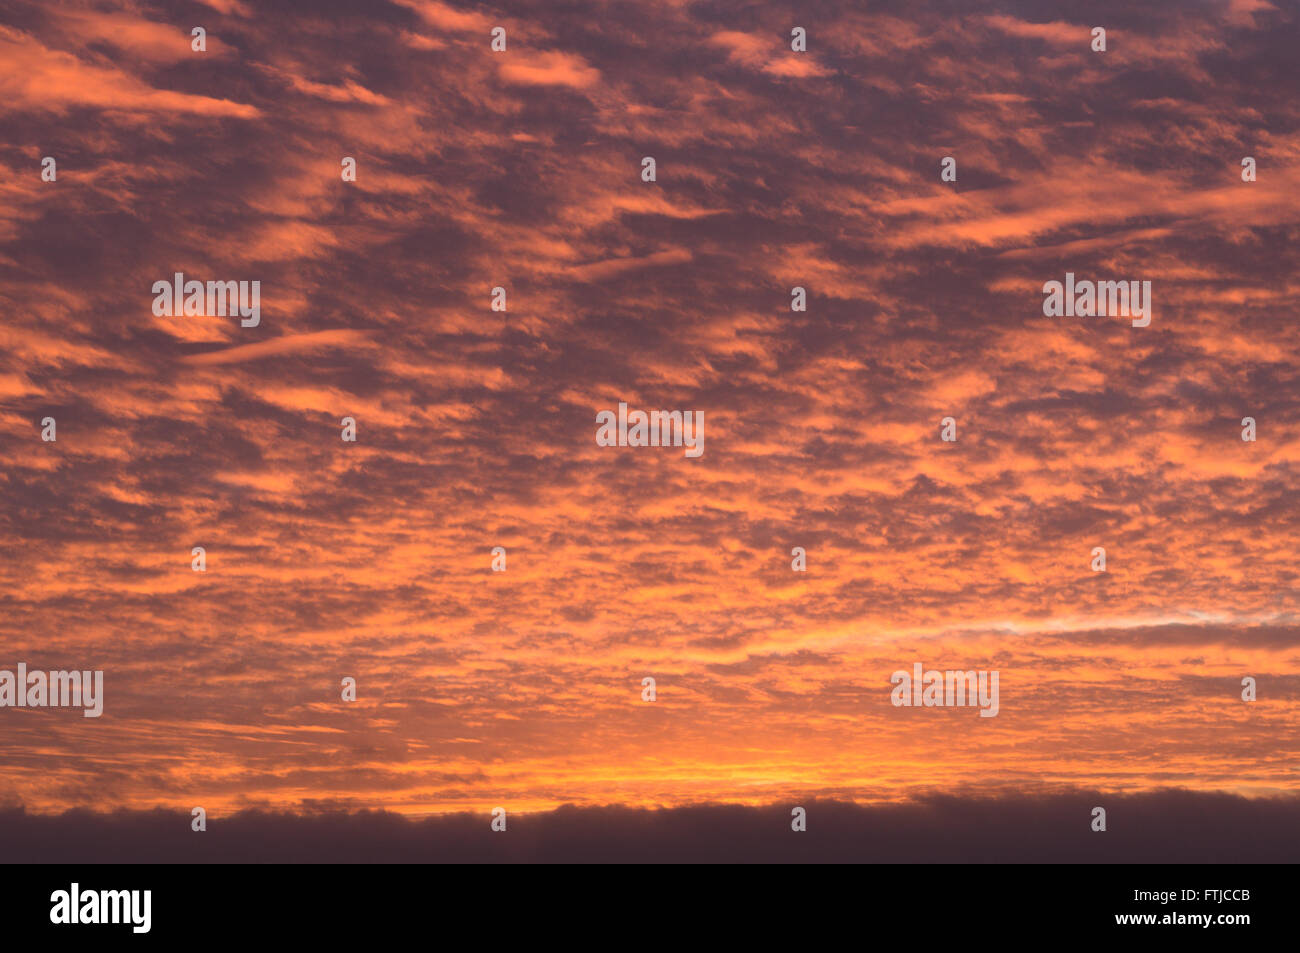 Sunset sky covered by fiery orange clouds Stock Photo